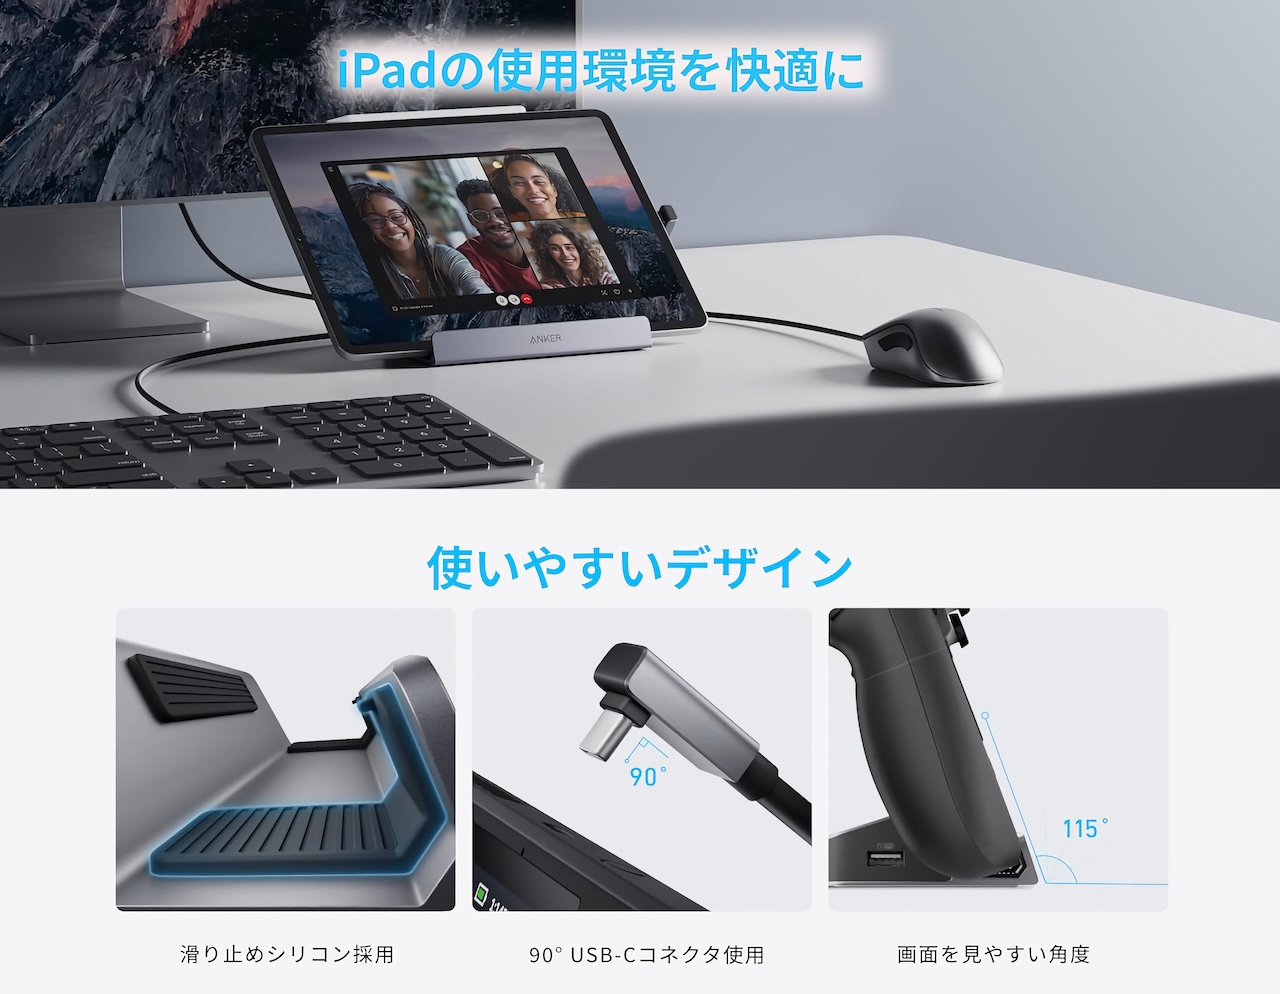 Anker USB-C ハブ (6-in-1, For Game Console)